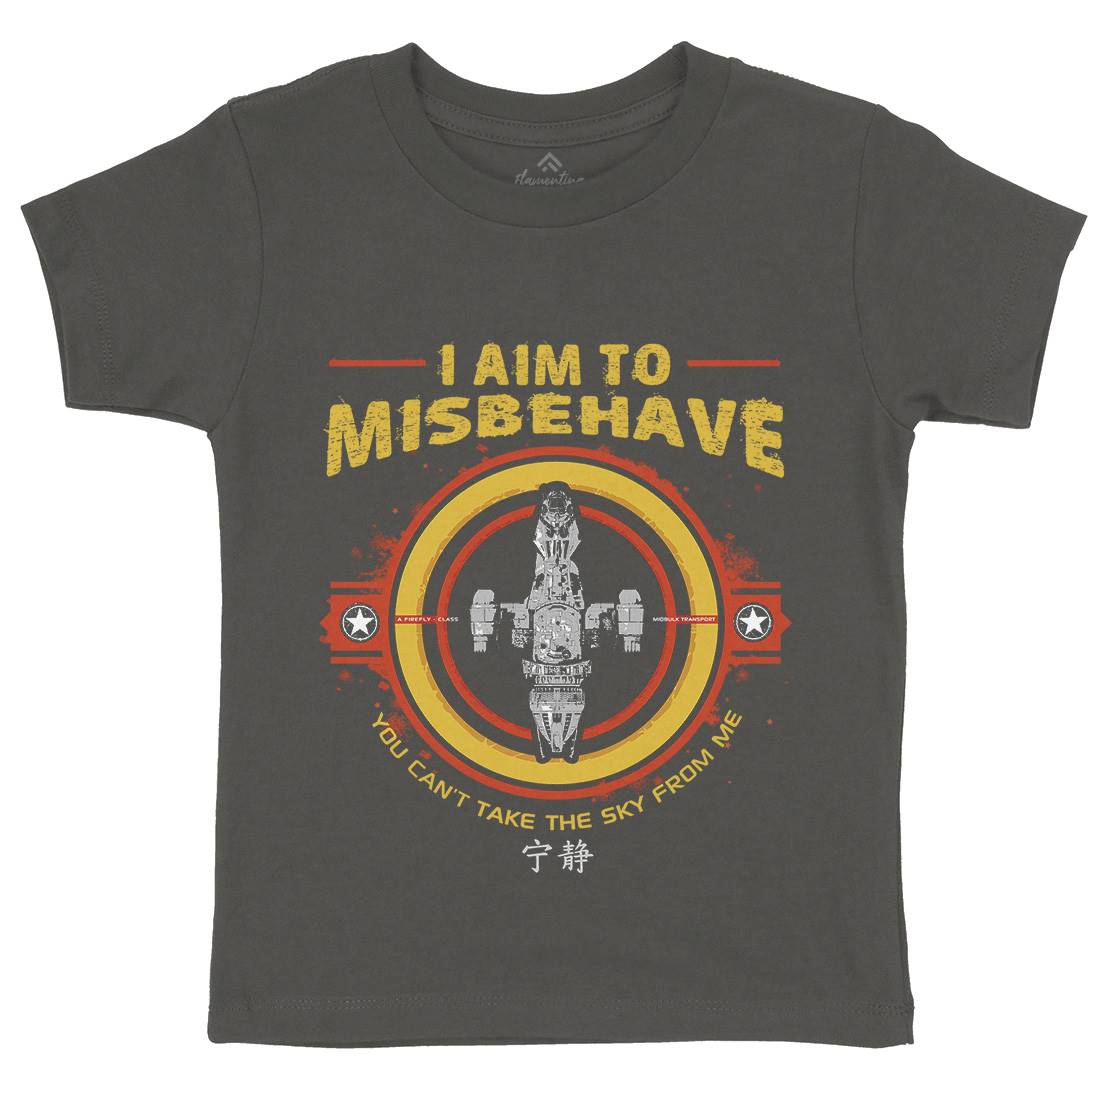 I Aim To Misbehave Kids Crew Neck T-Shirt Space D352